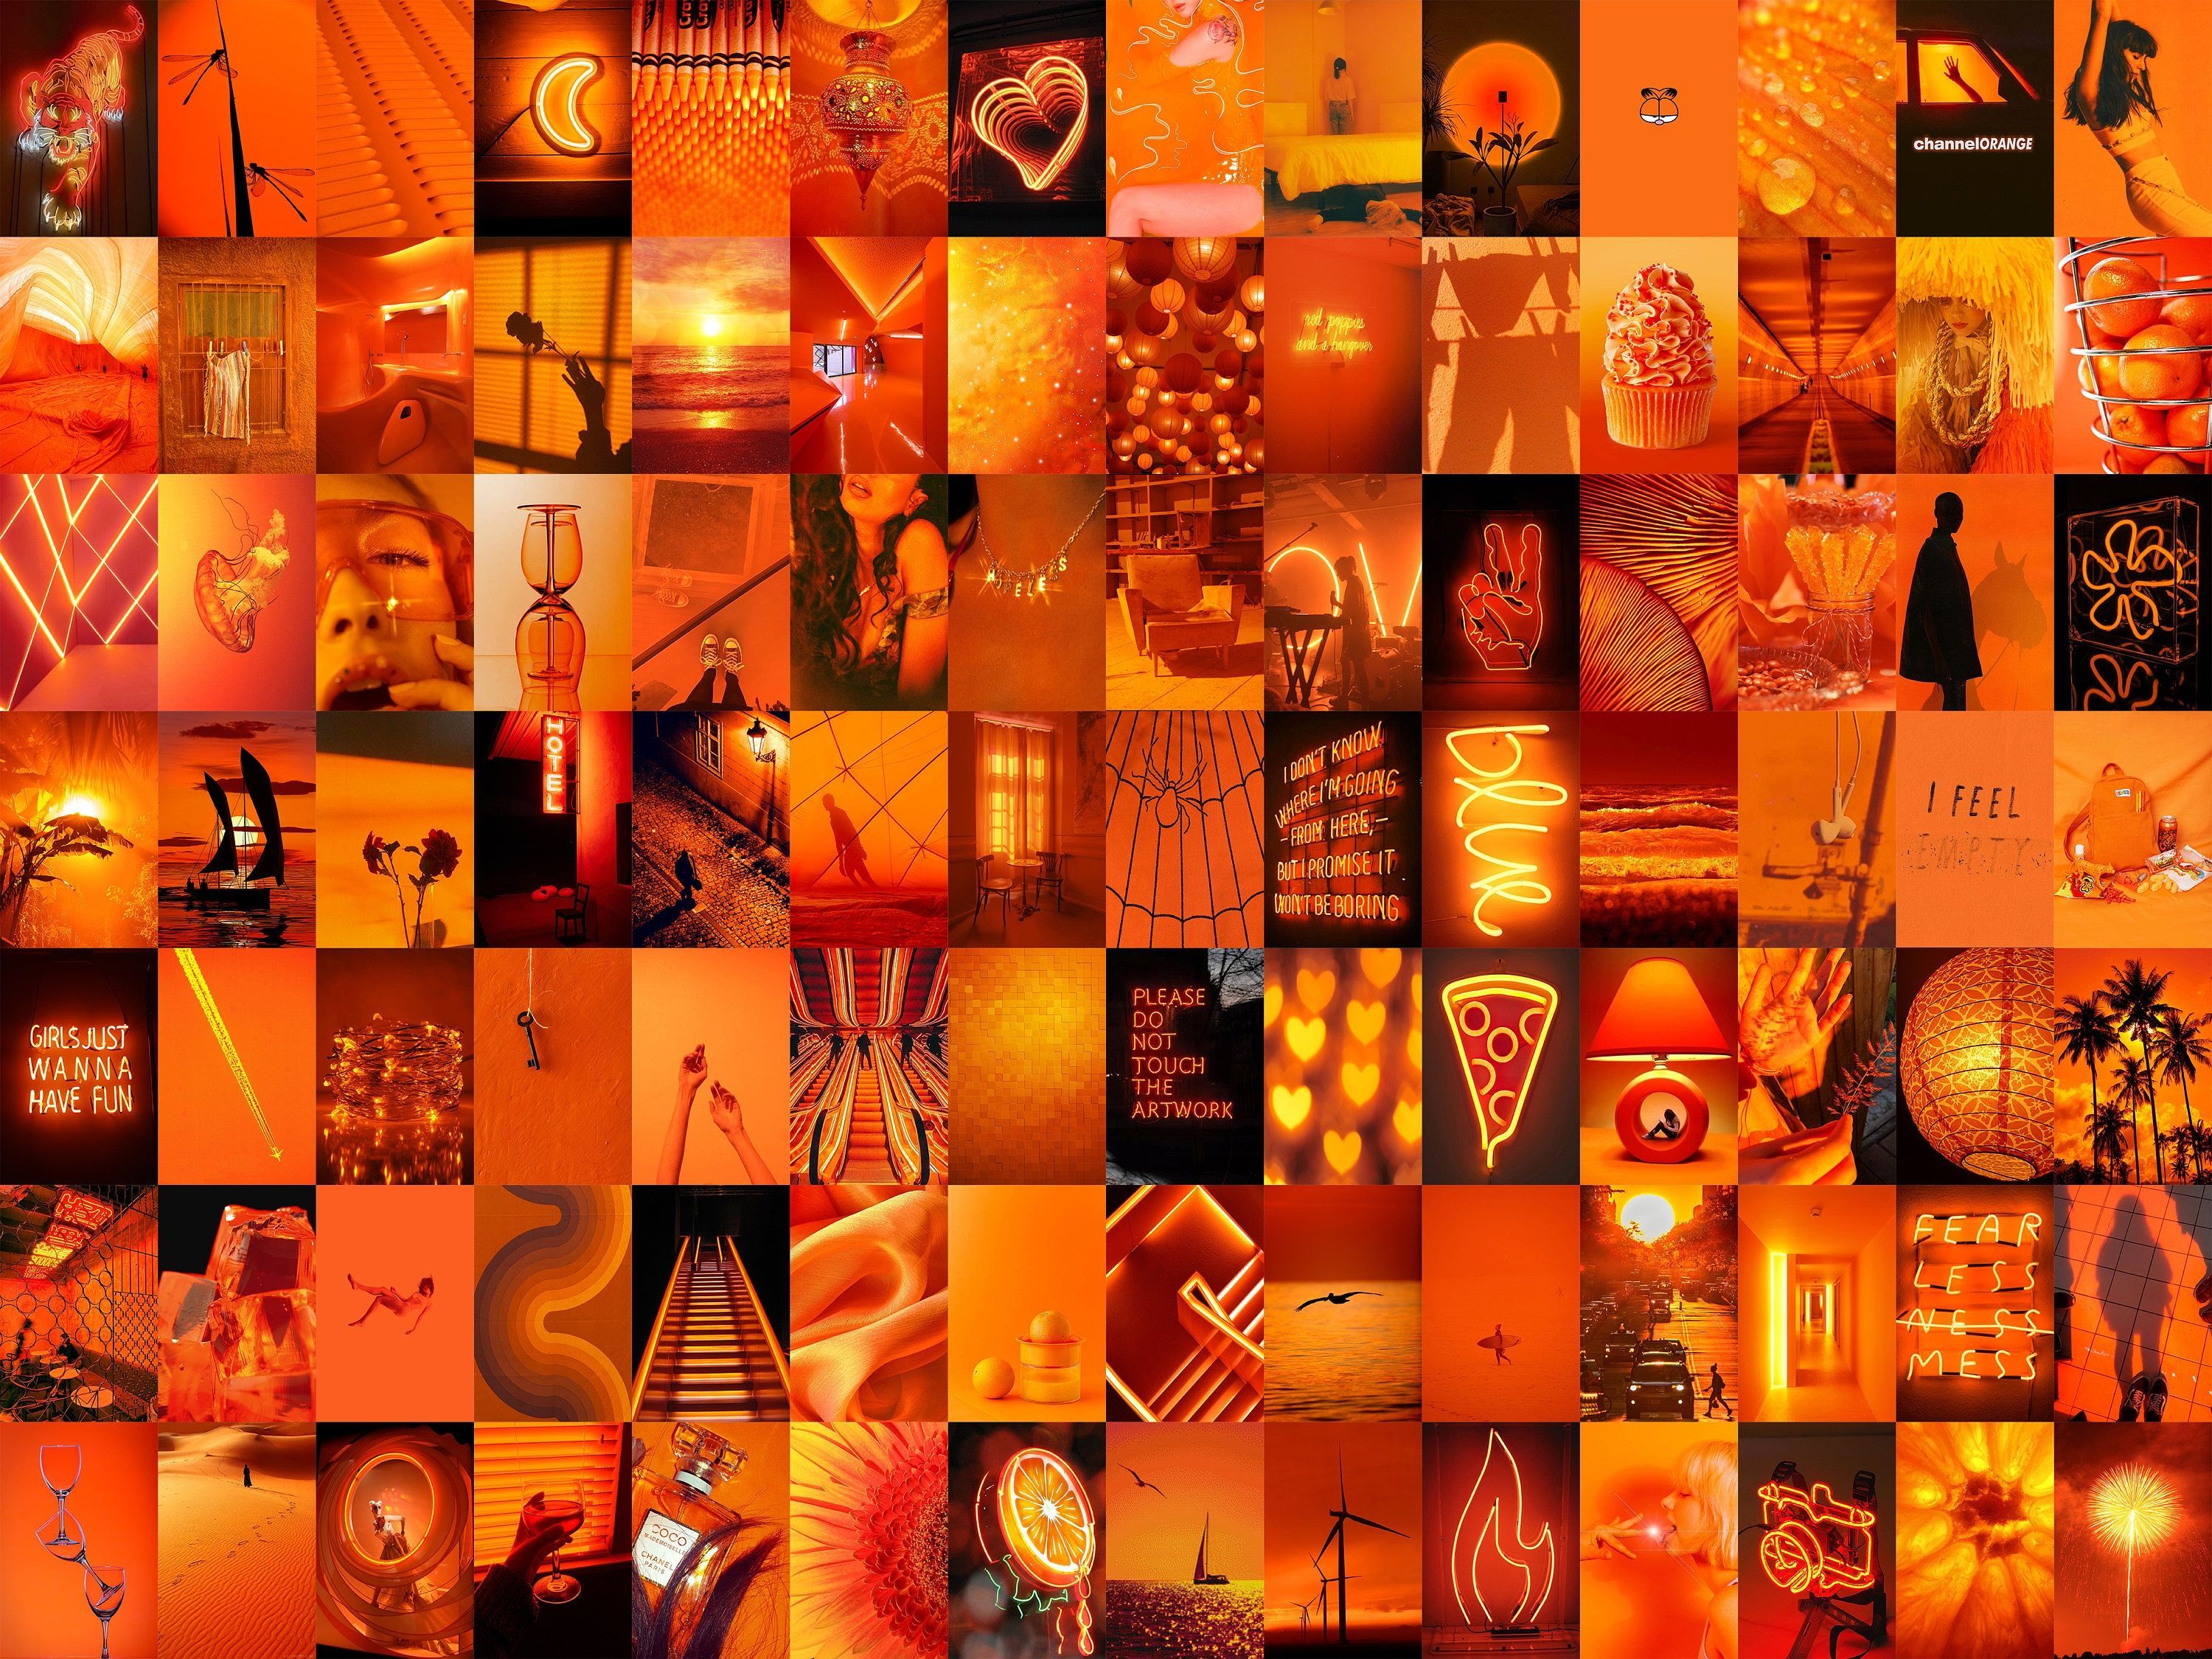 A collage of 60 photos in shades of orange, red, and brown. - Neon orange